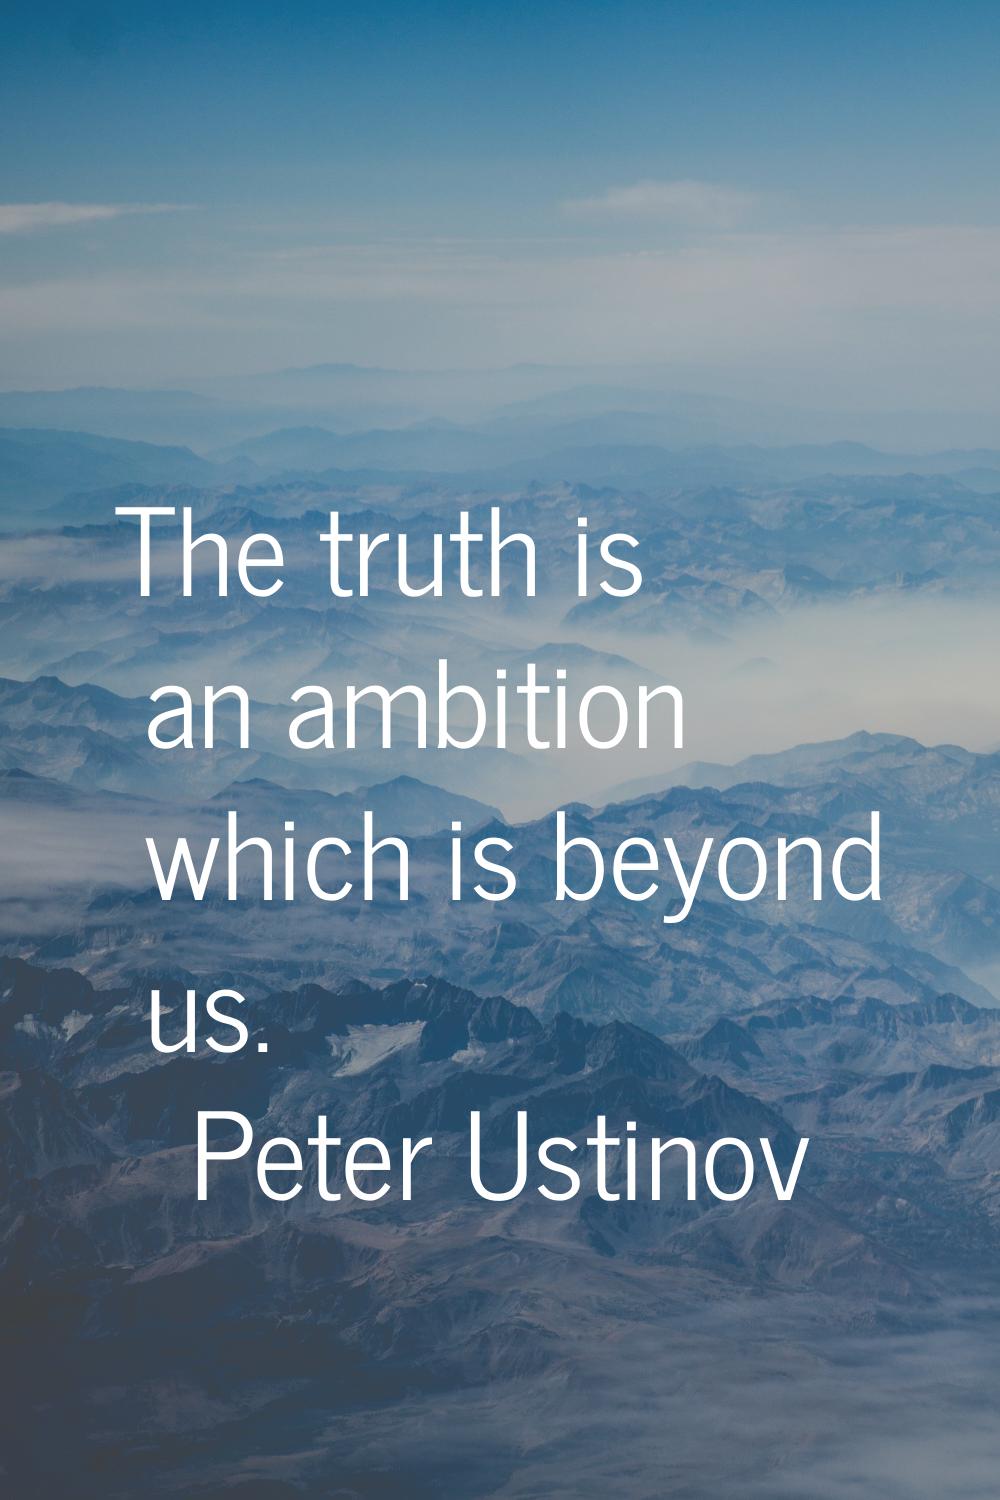 The truth is an ambition which is beyond us.